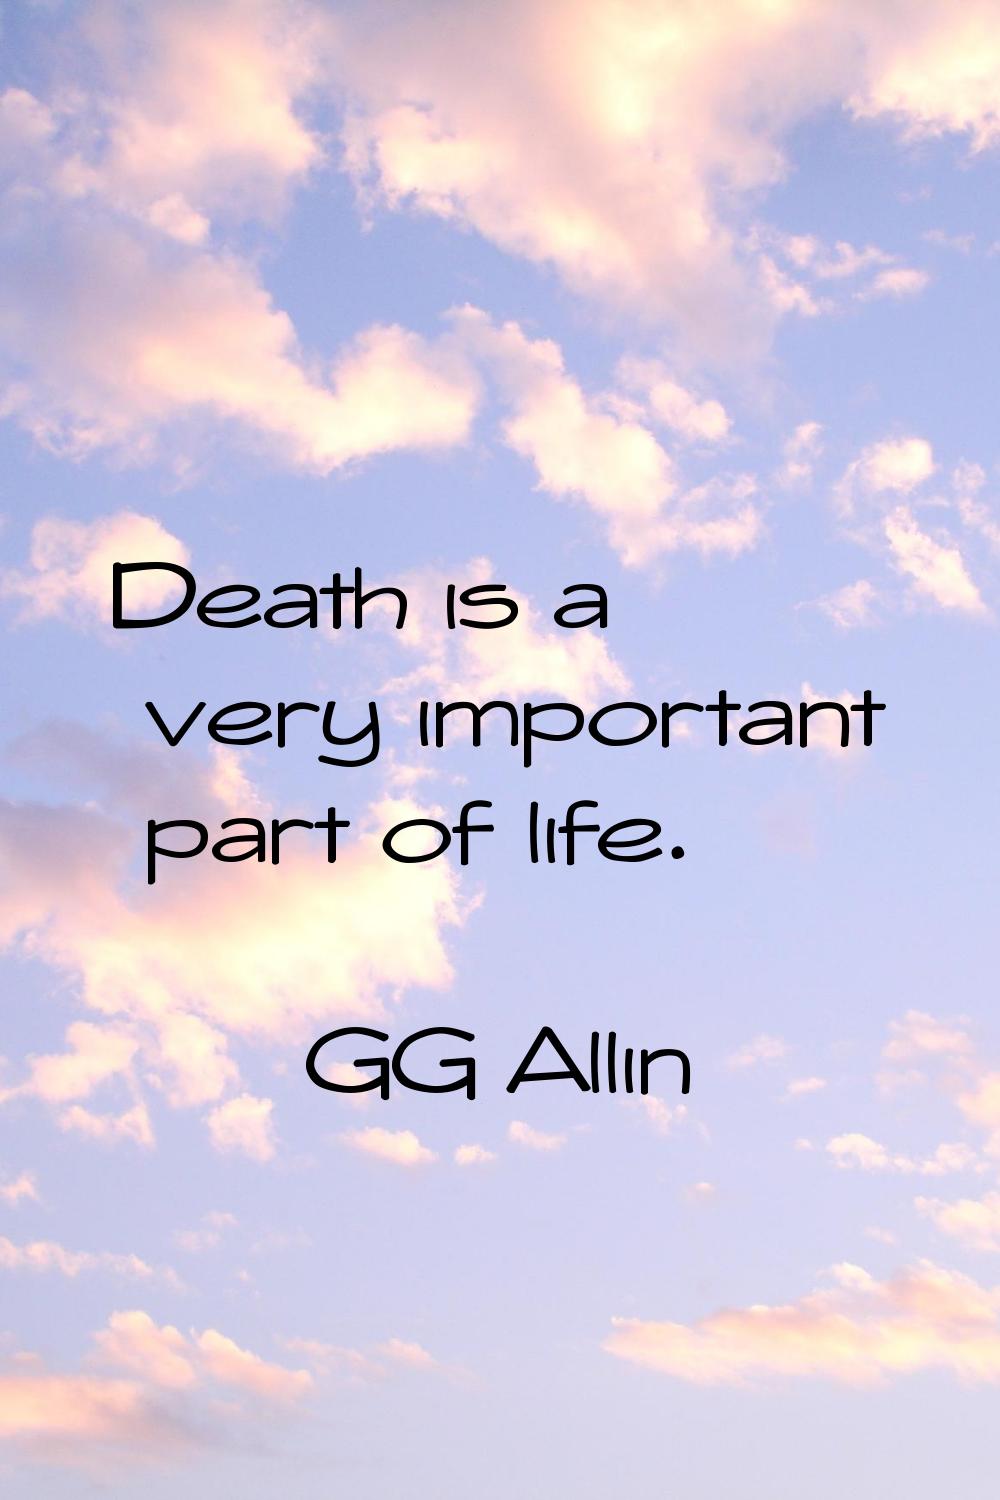 Death is a very important part of life.